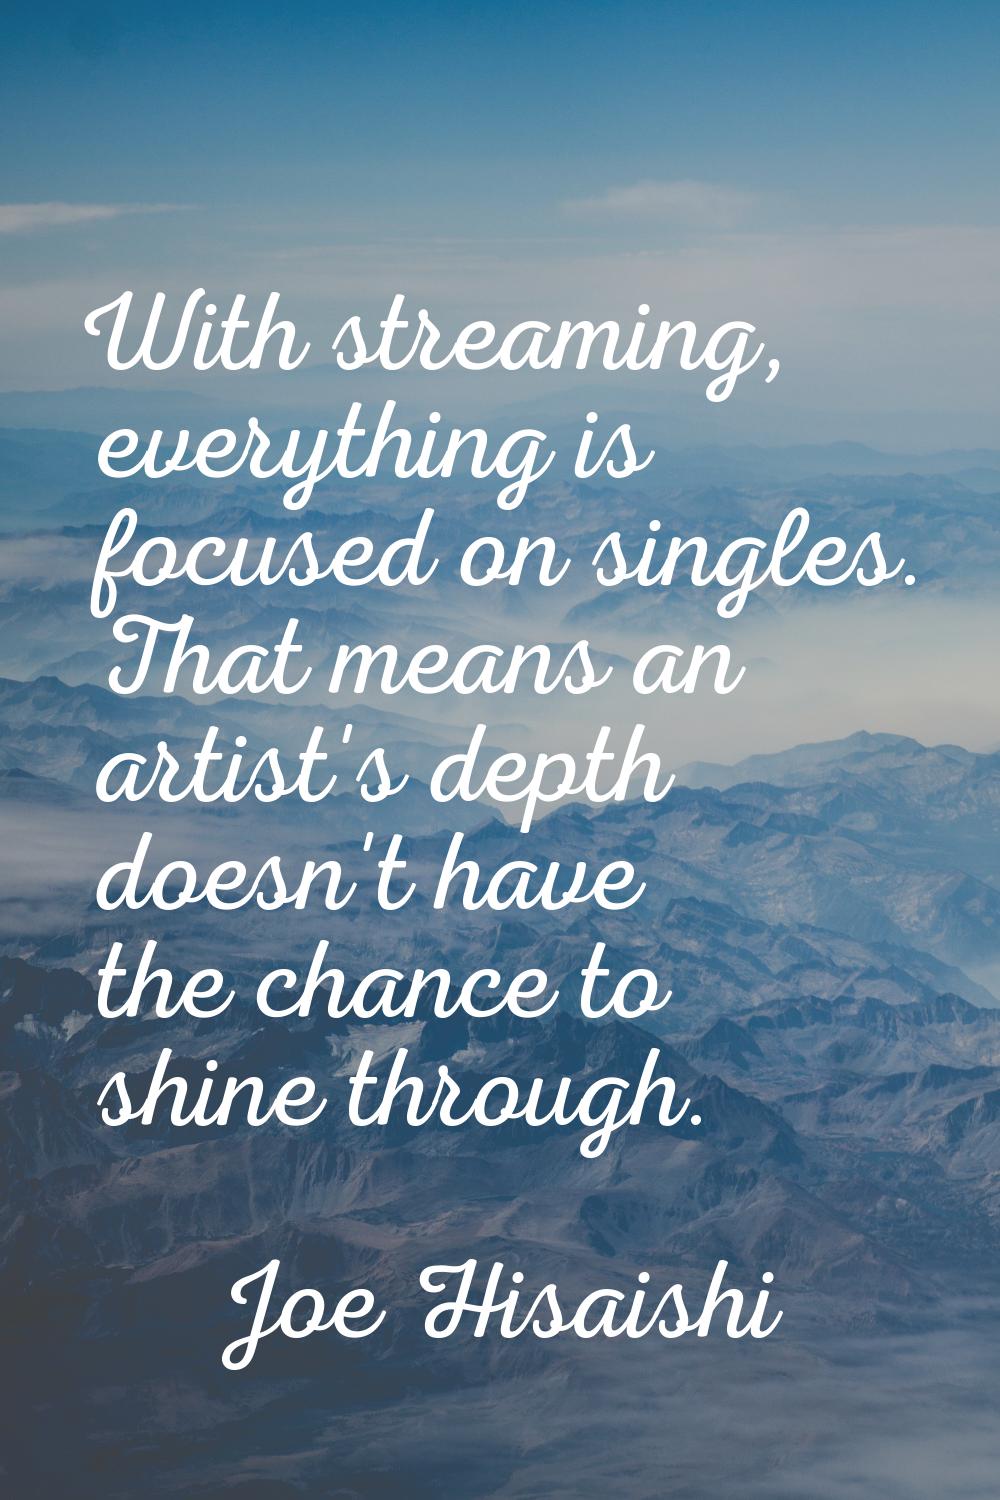 With streaming, everything is focused on singles. That means an artist's depth doesn't have the cha